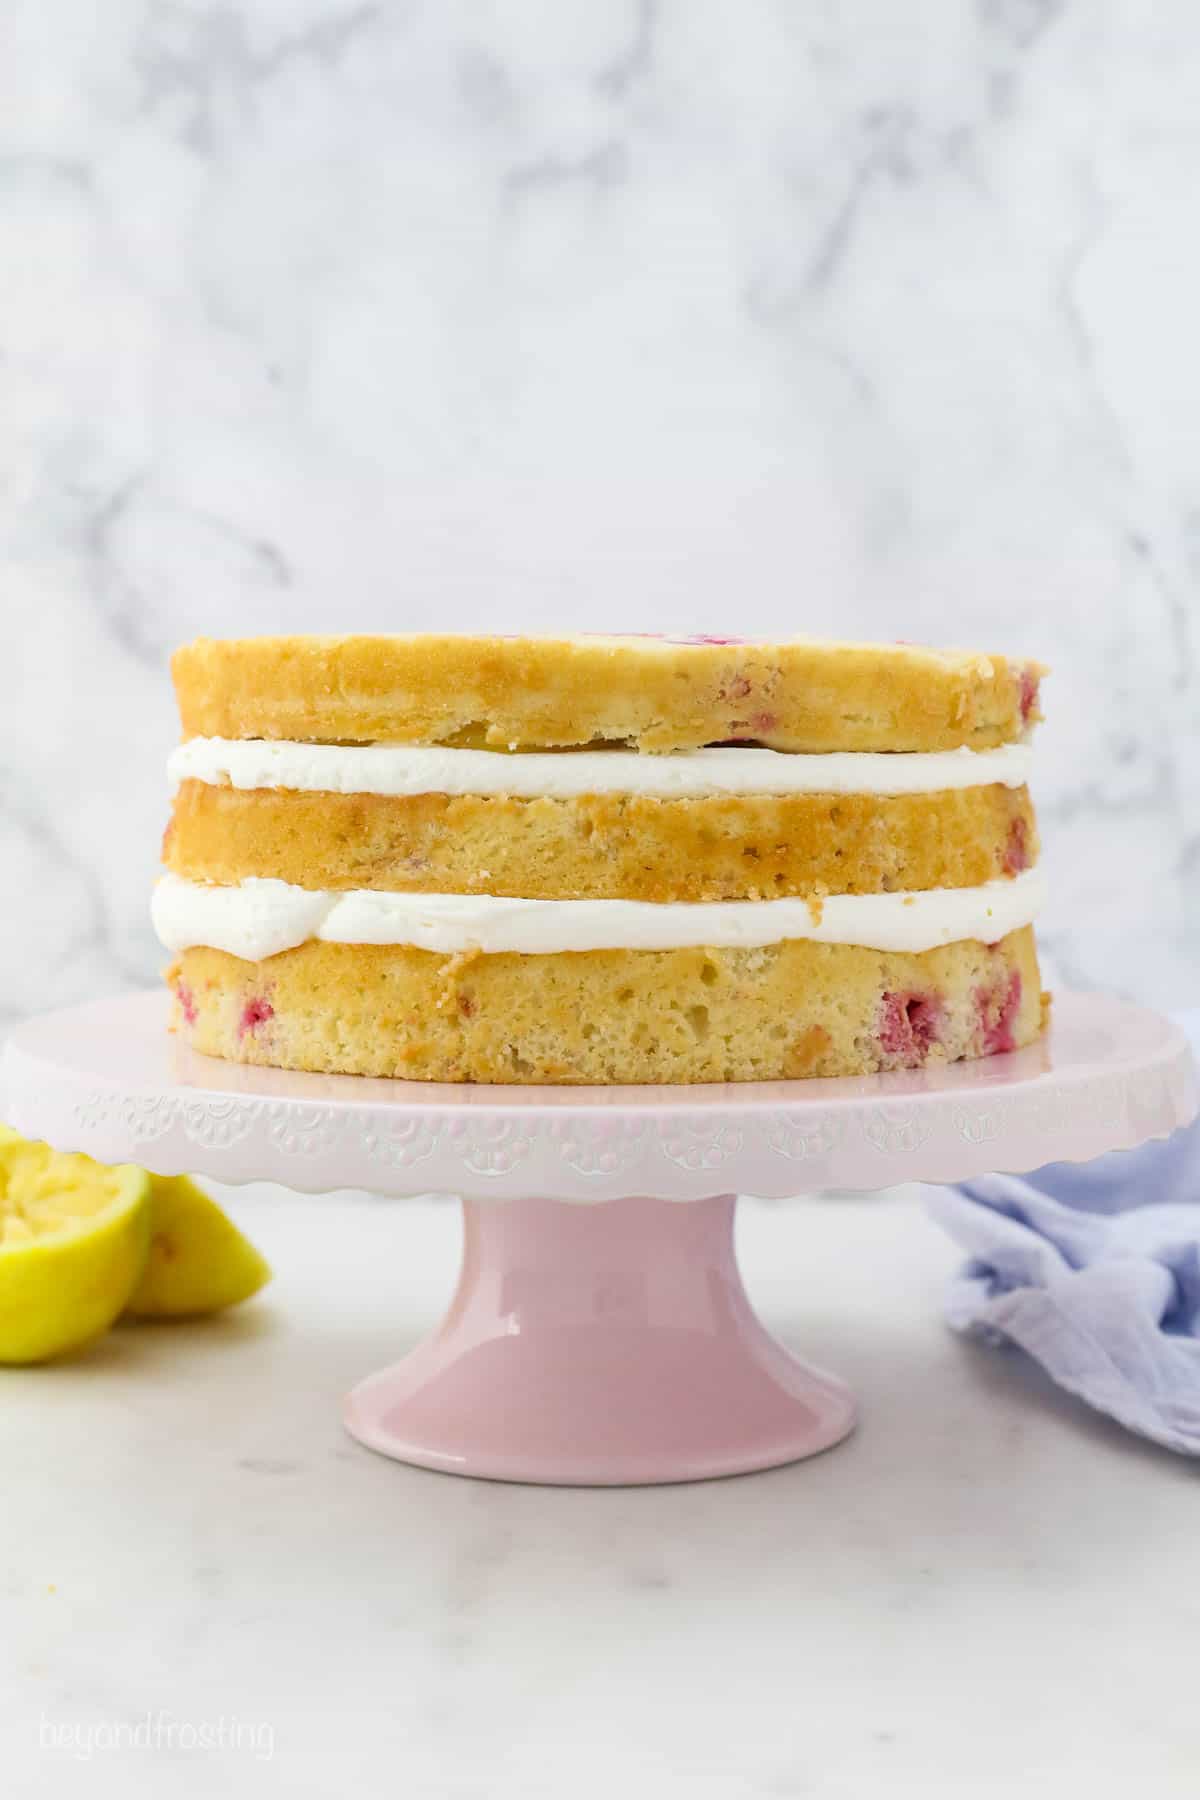 Side view of an unfrosted lemon raspberry layer cake